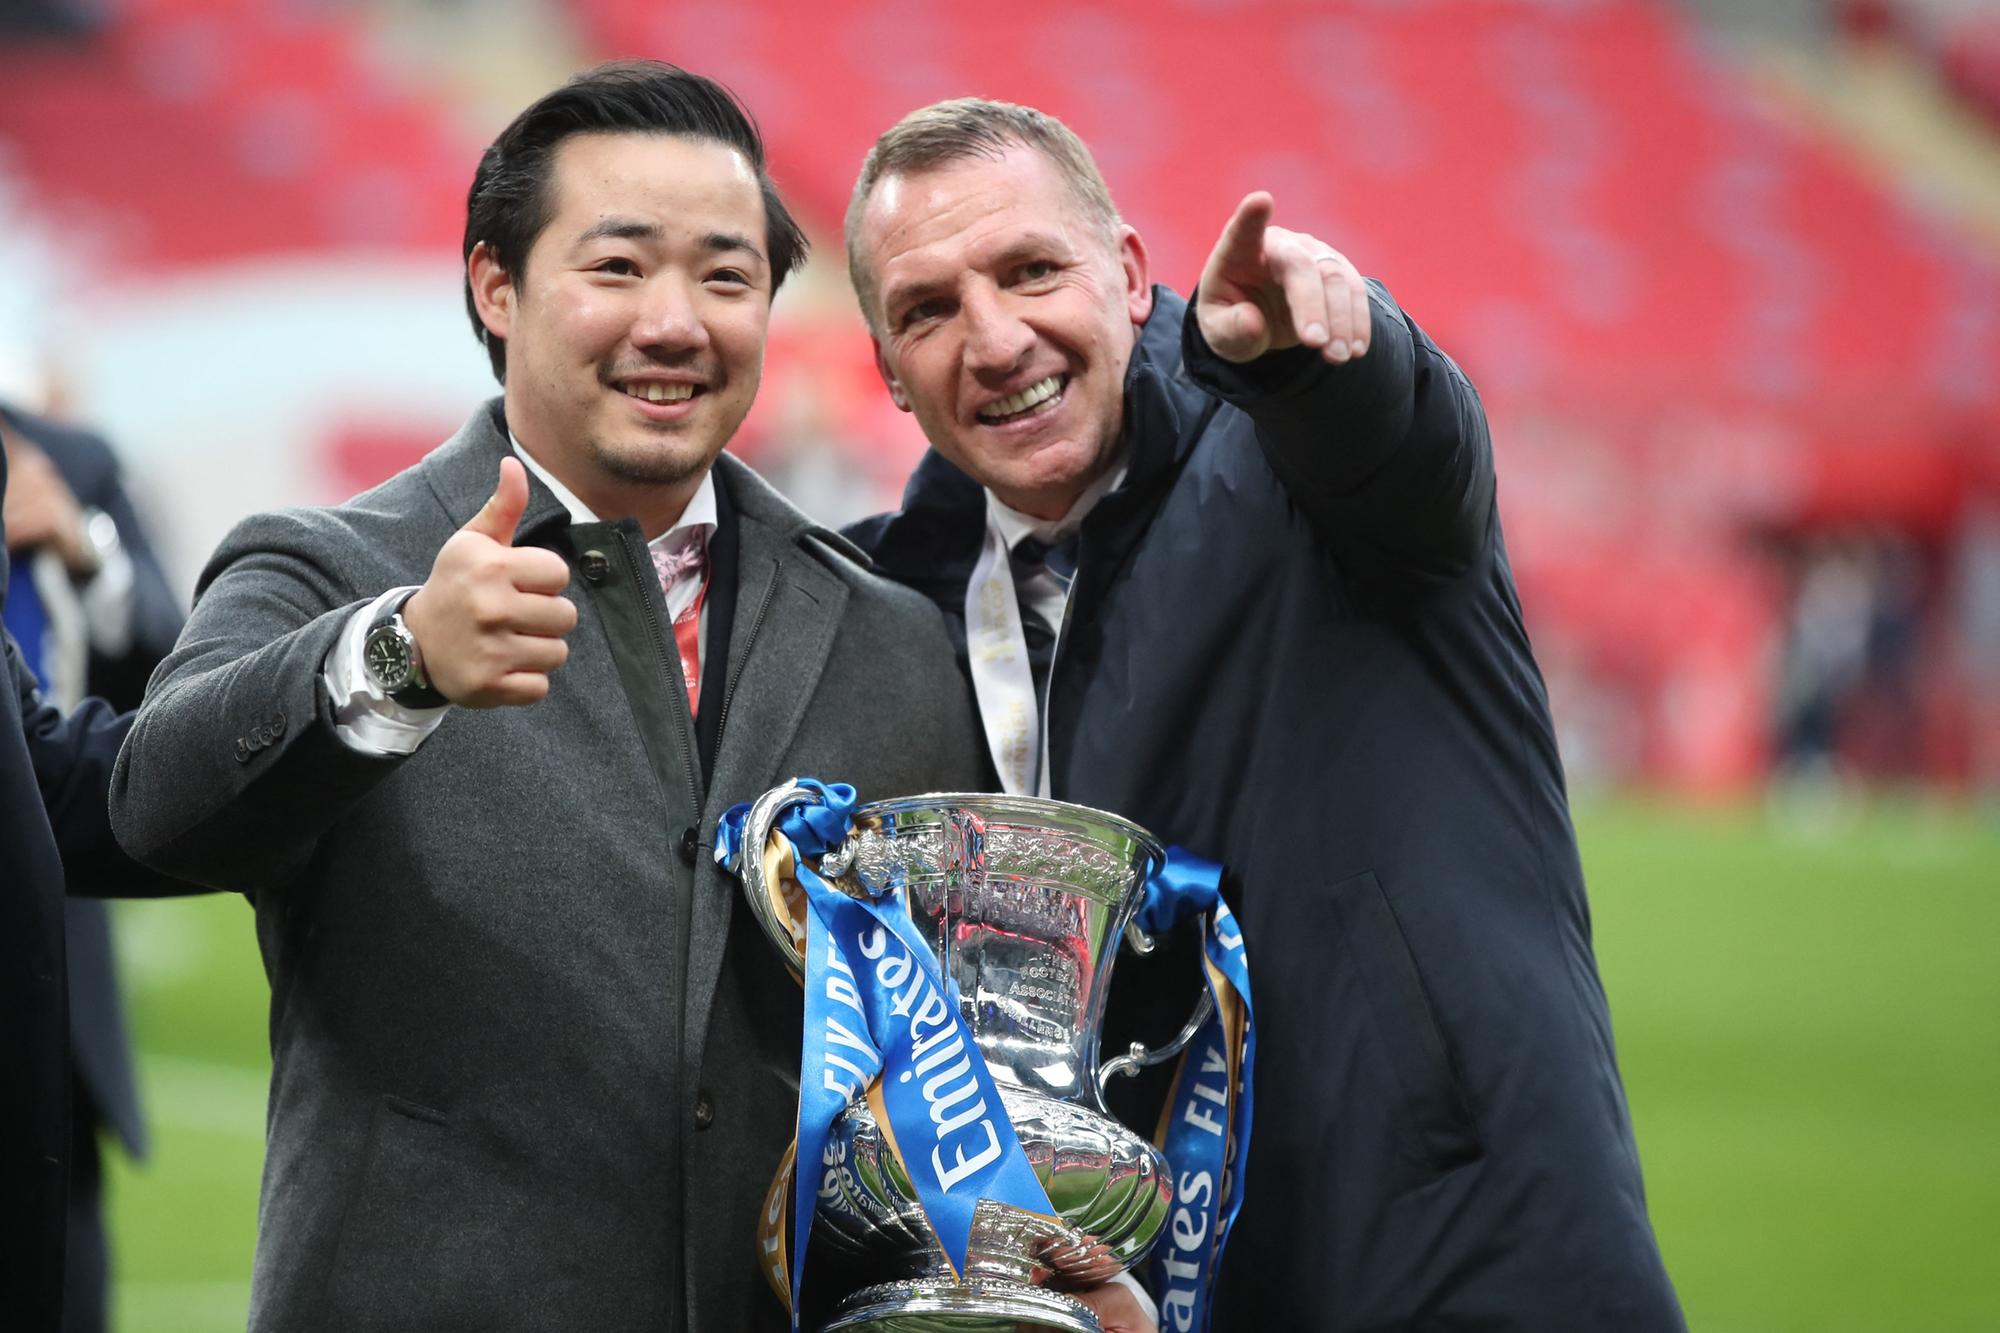 brendan rodgers' cup exploits helped vindicate celtic move - and brought call from sir alex ferguson